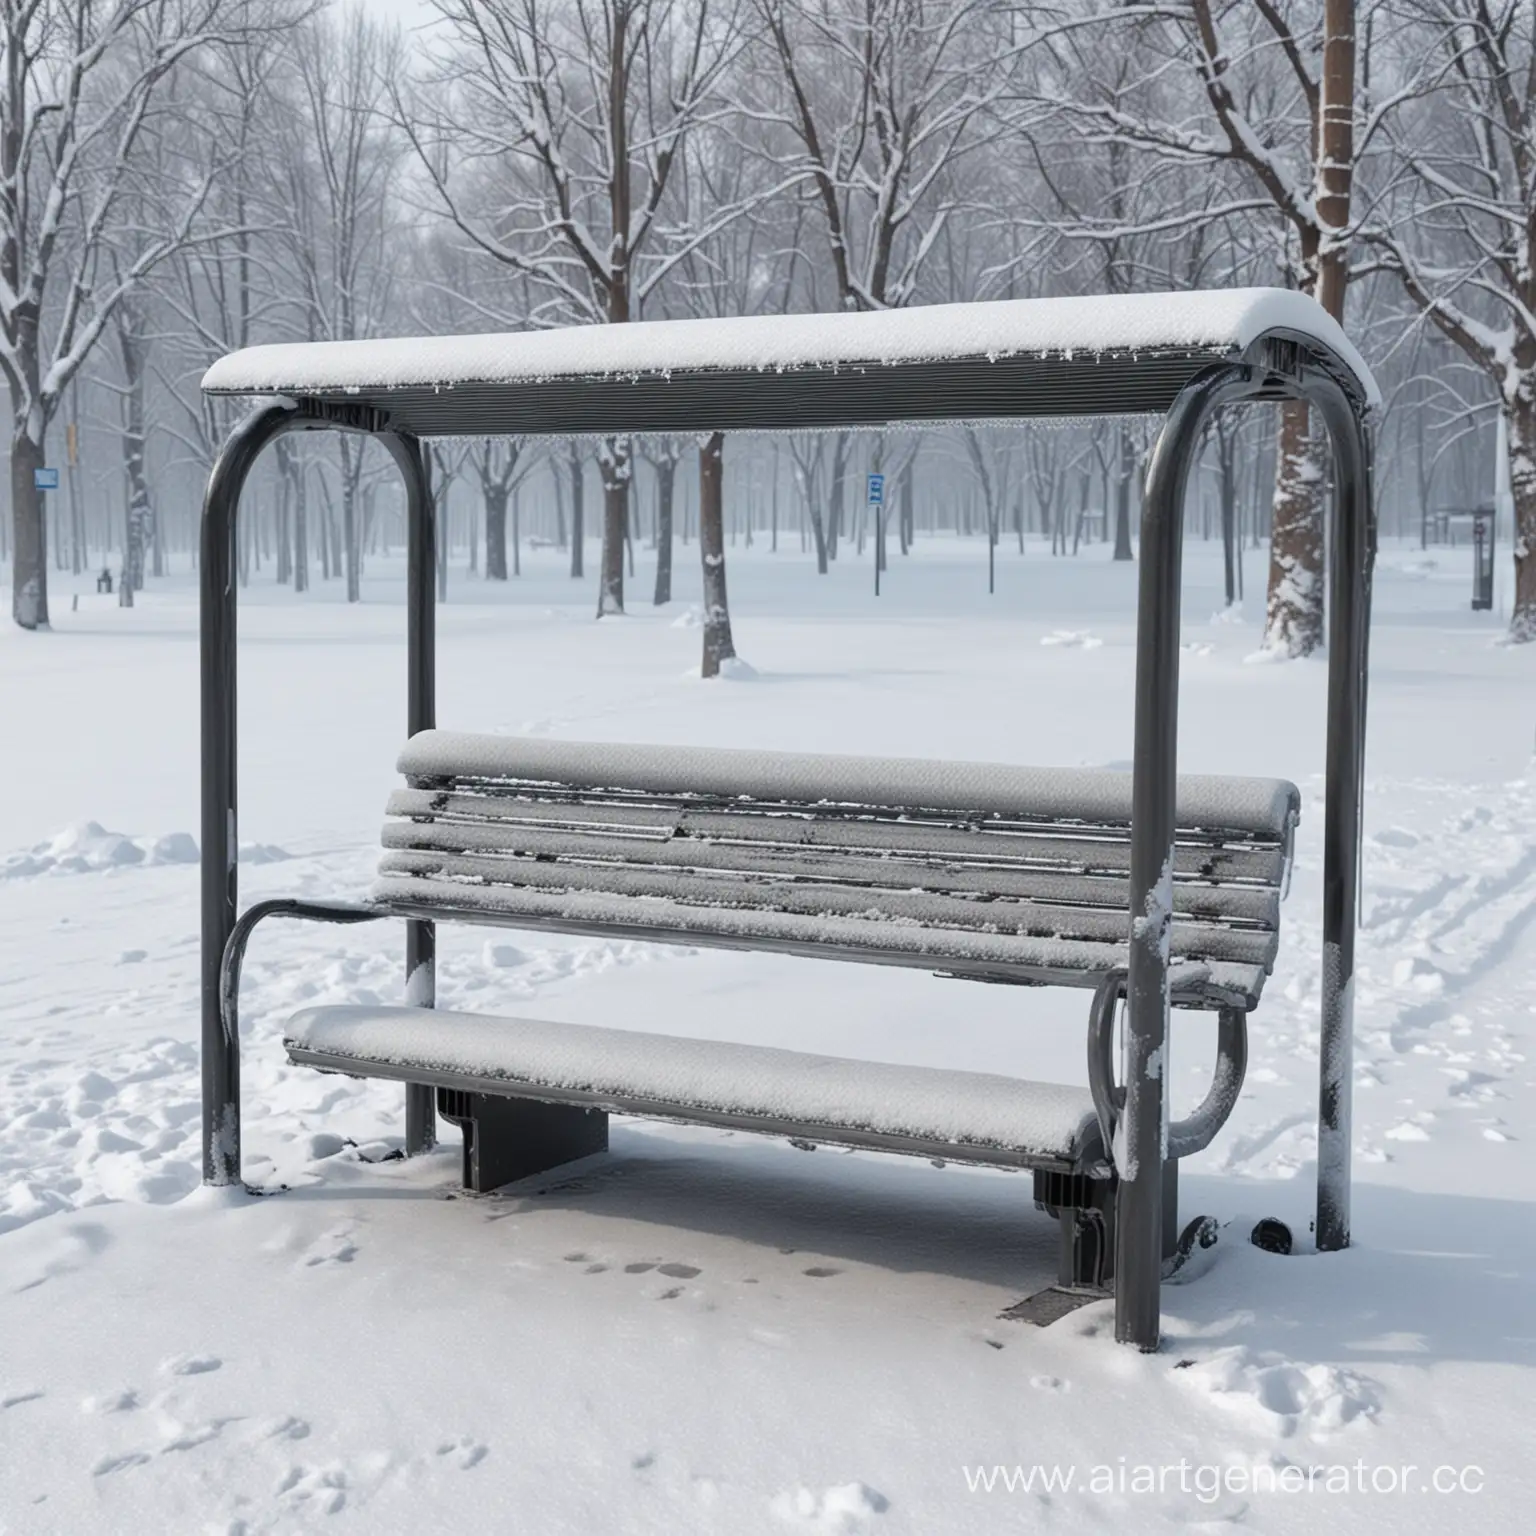 Winter-City-Scene-Heat-Pipes-at-Public-Bus-Stop